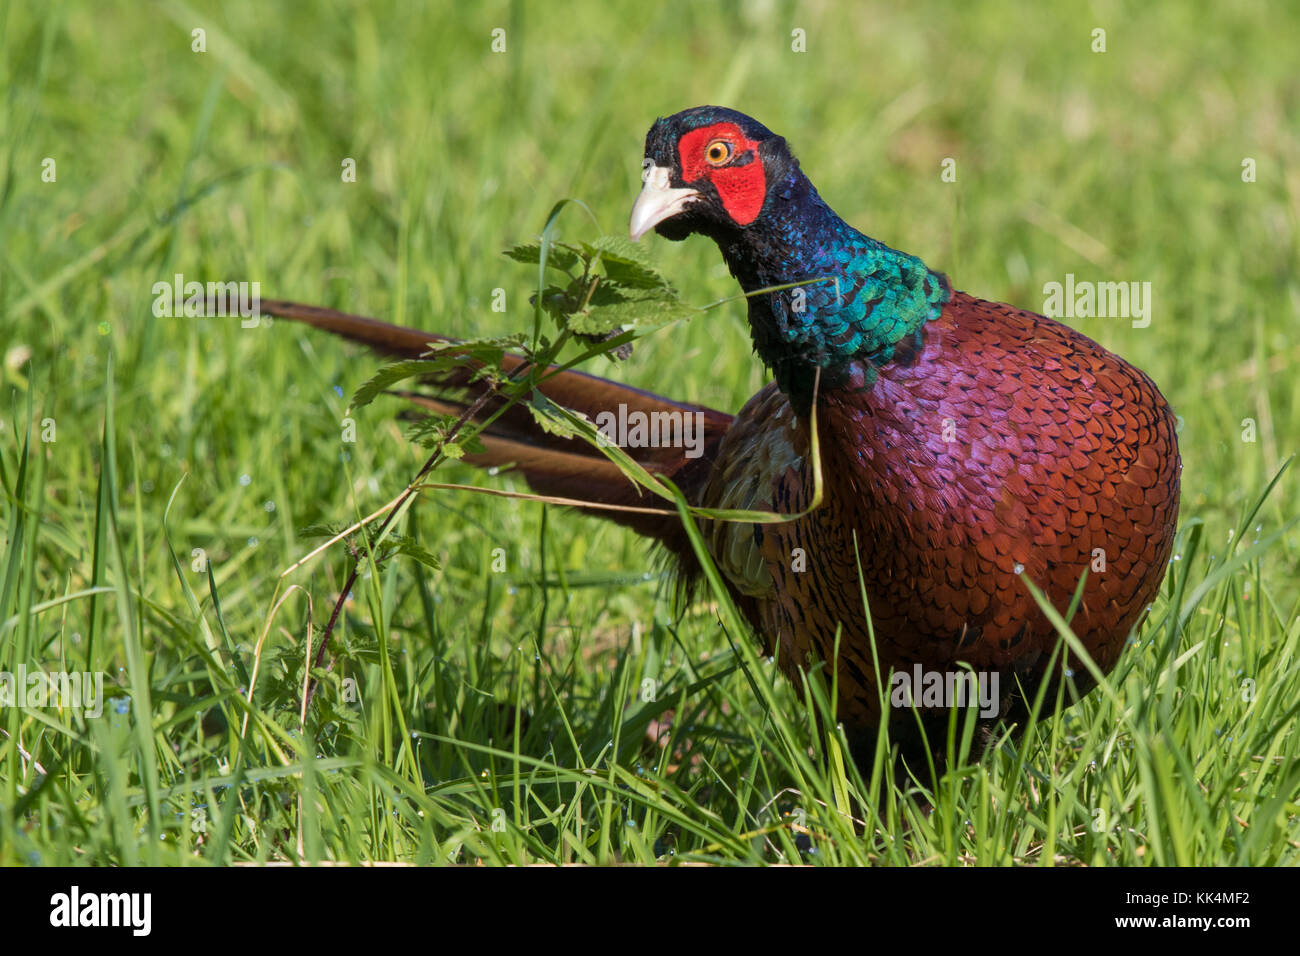 male Ring-necked Pheasant (Phasianus colchicus) eating insects from a Nettle Stock Photo